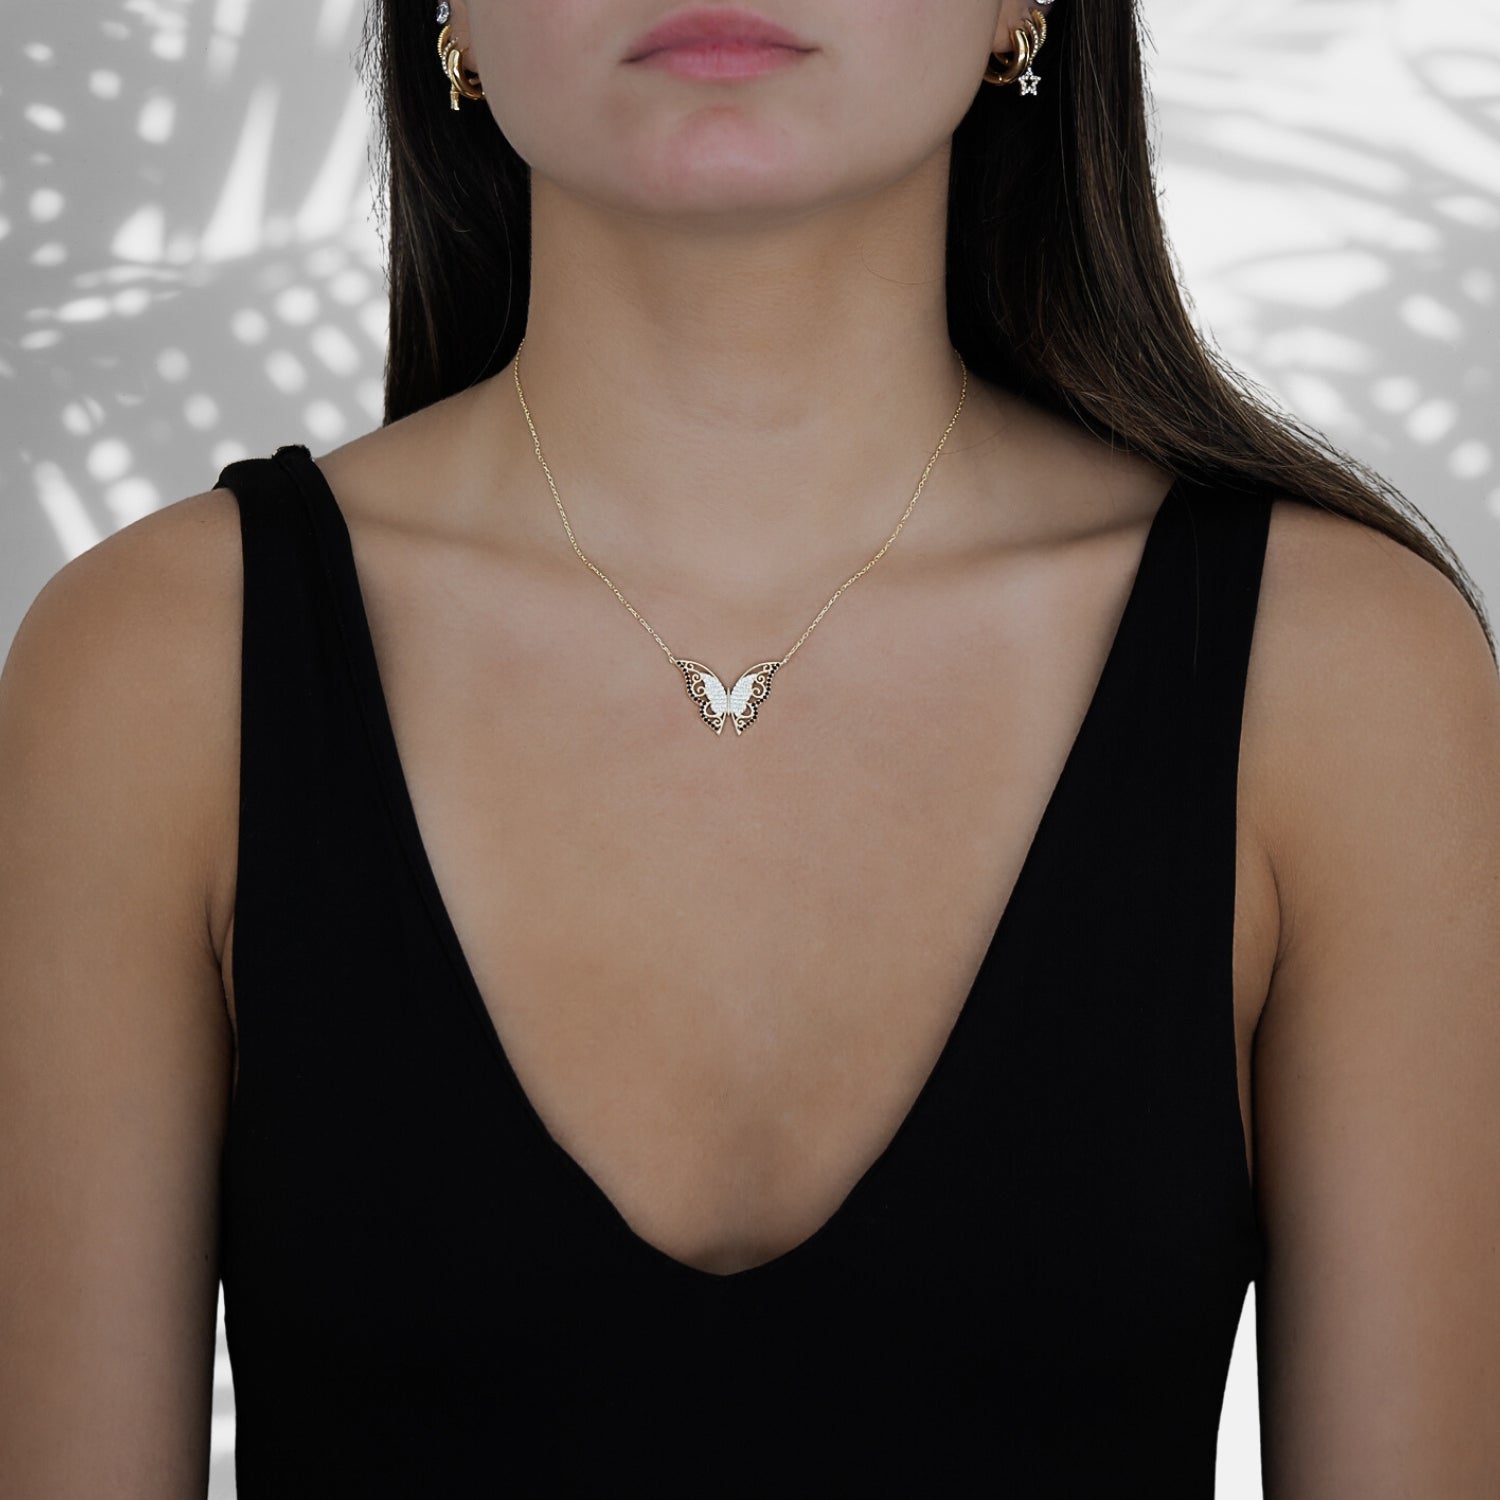 Model wearing the Gold Sparkly Joyful Butterfly Necklace, symbolizing joy and embracing the transformative power of self-discovery.